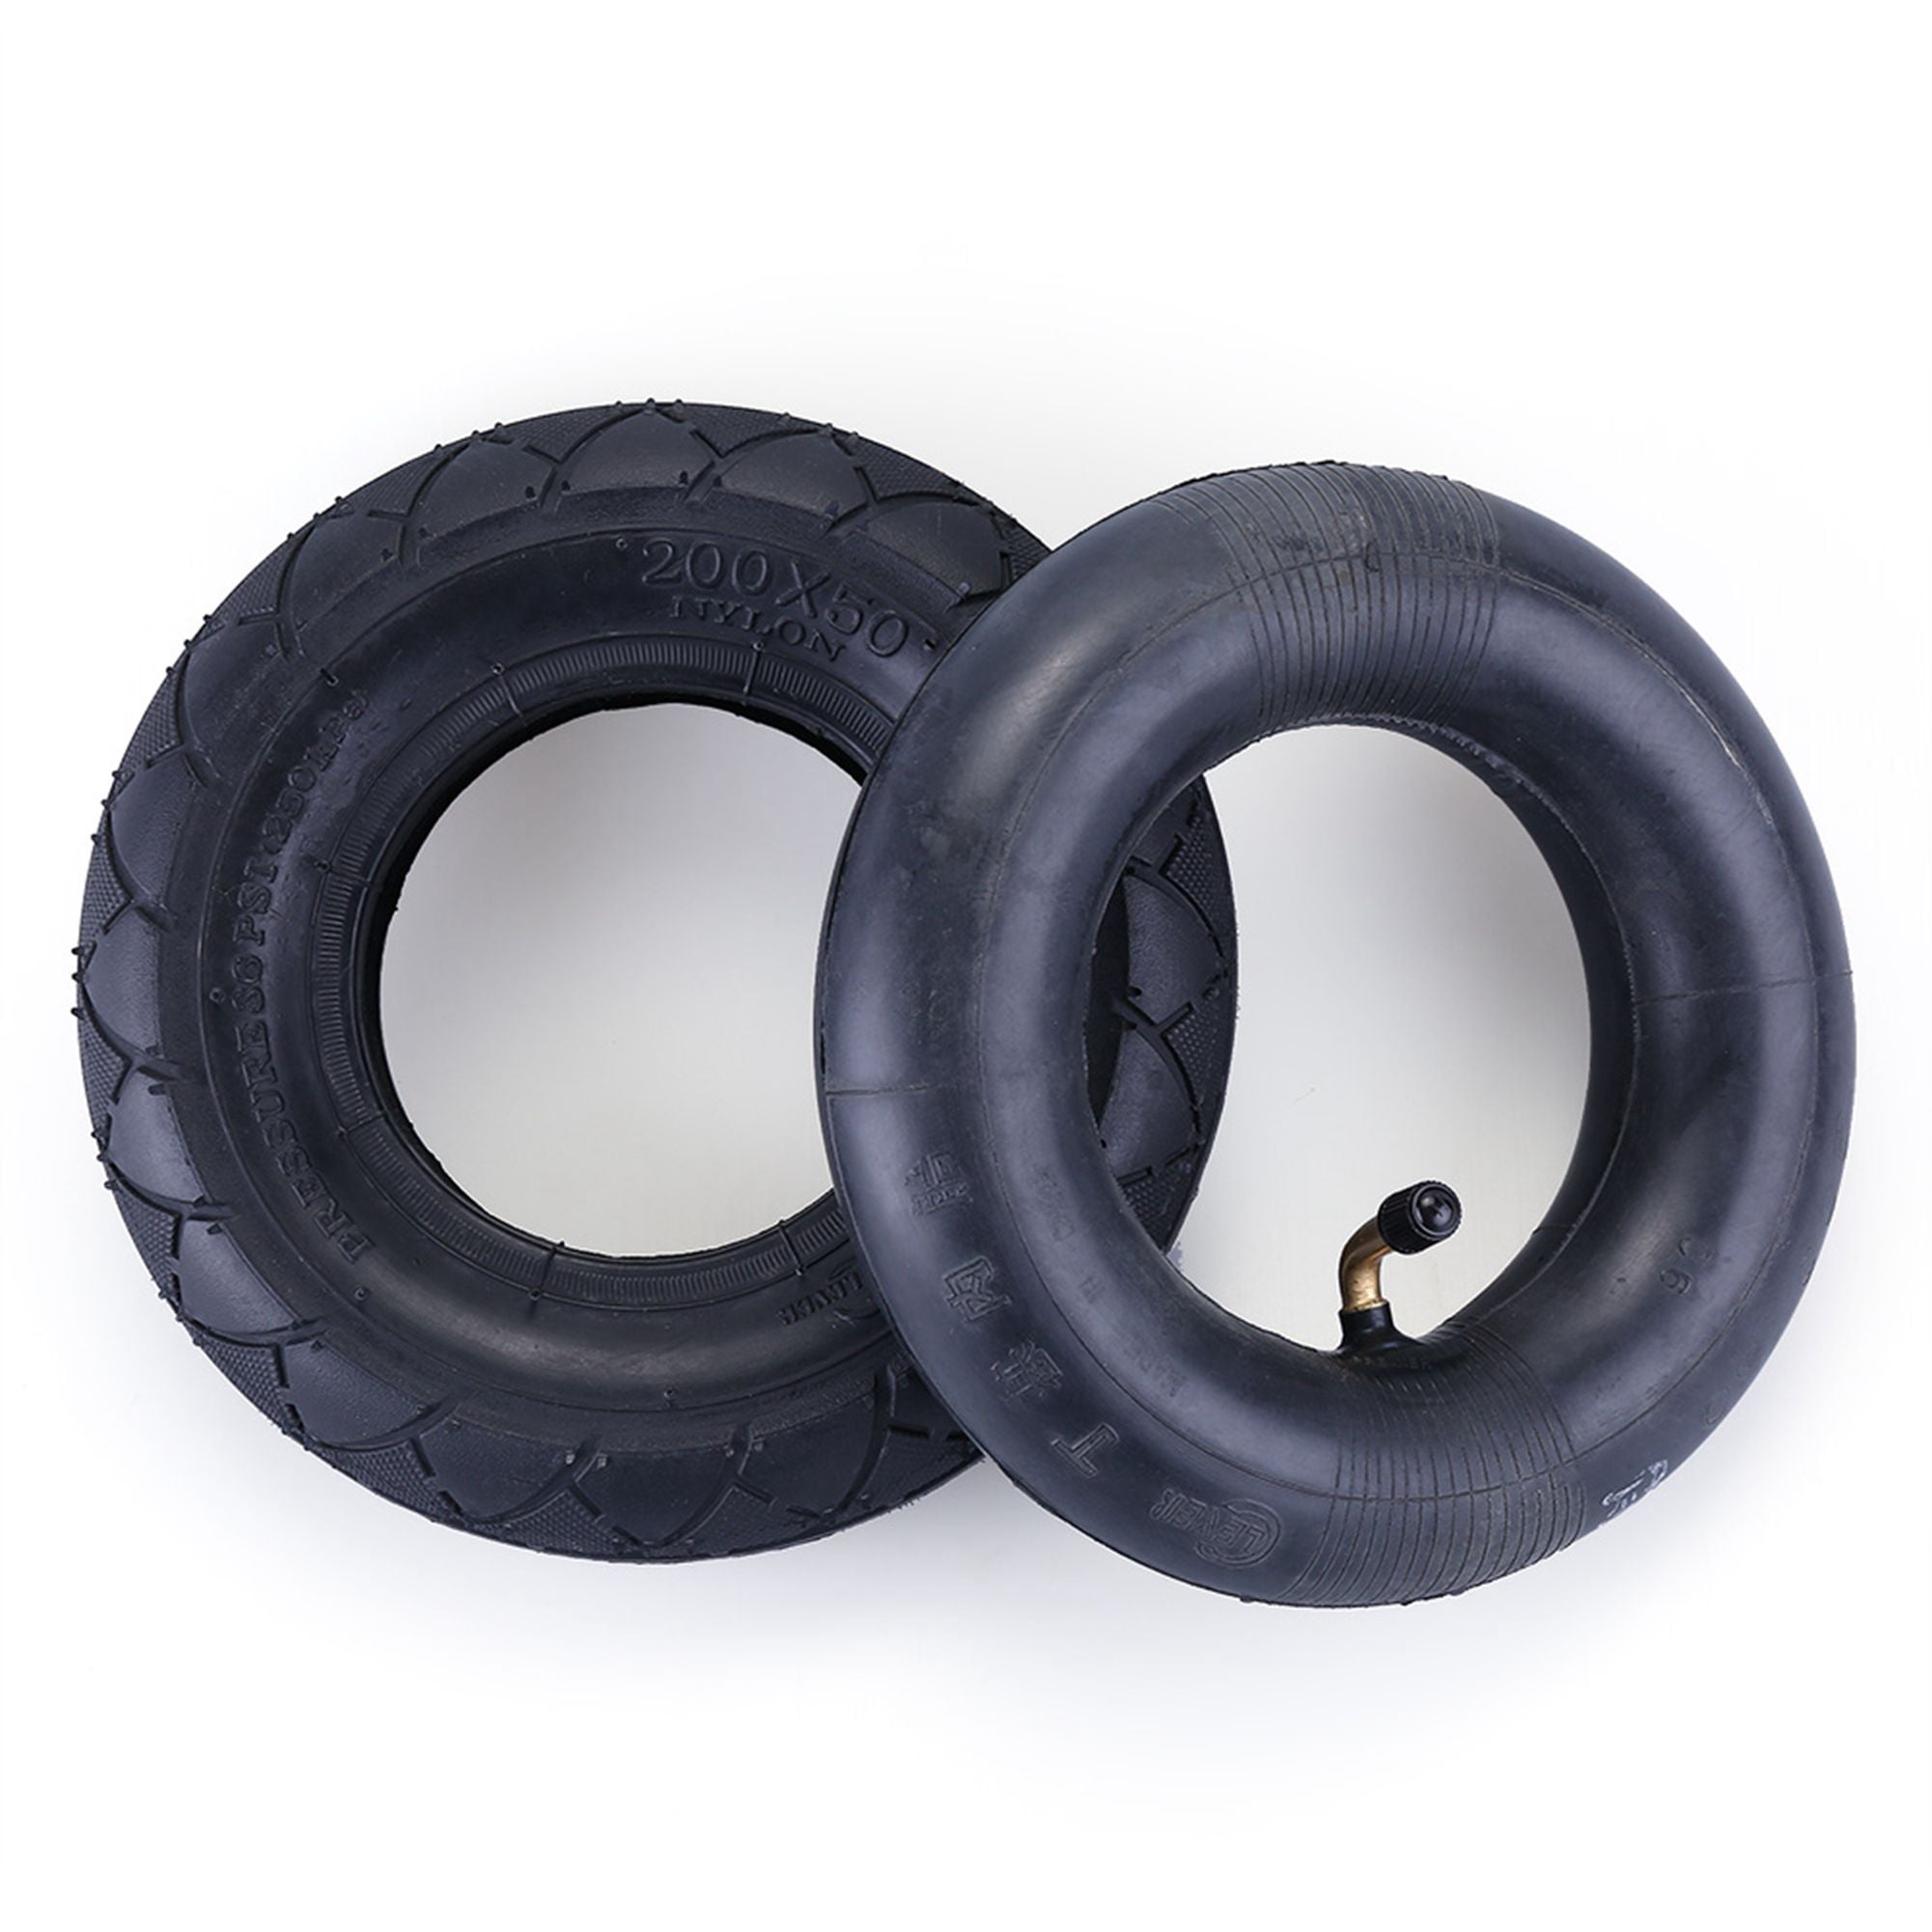 200X50 Tire /& Inner Tube Set Electric Scooter For Power Core E100 PowerRider 360